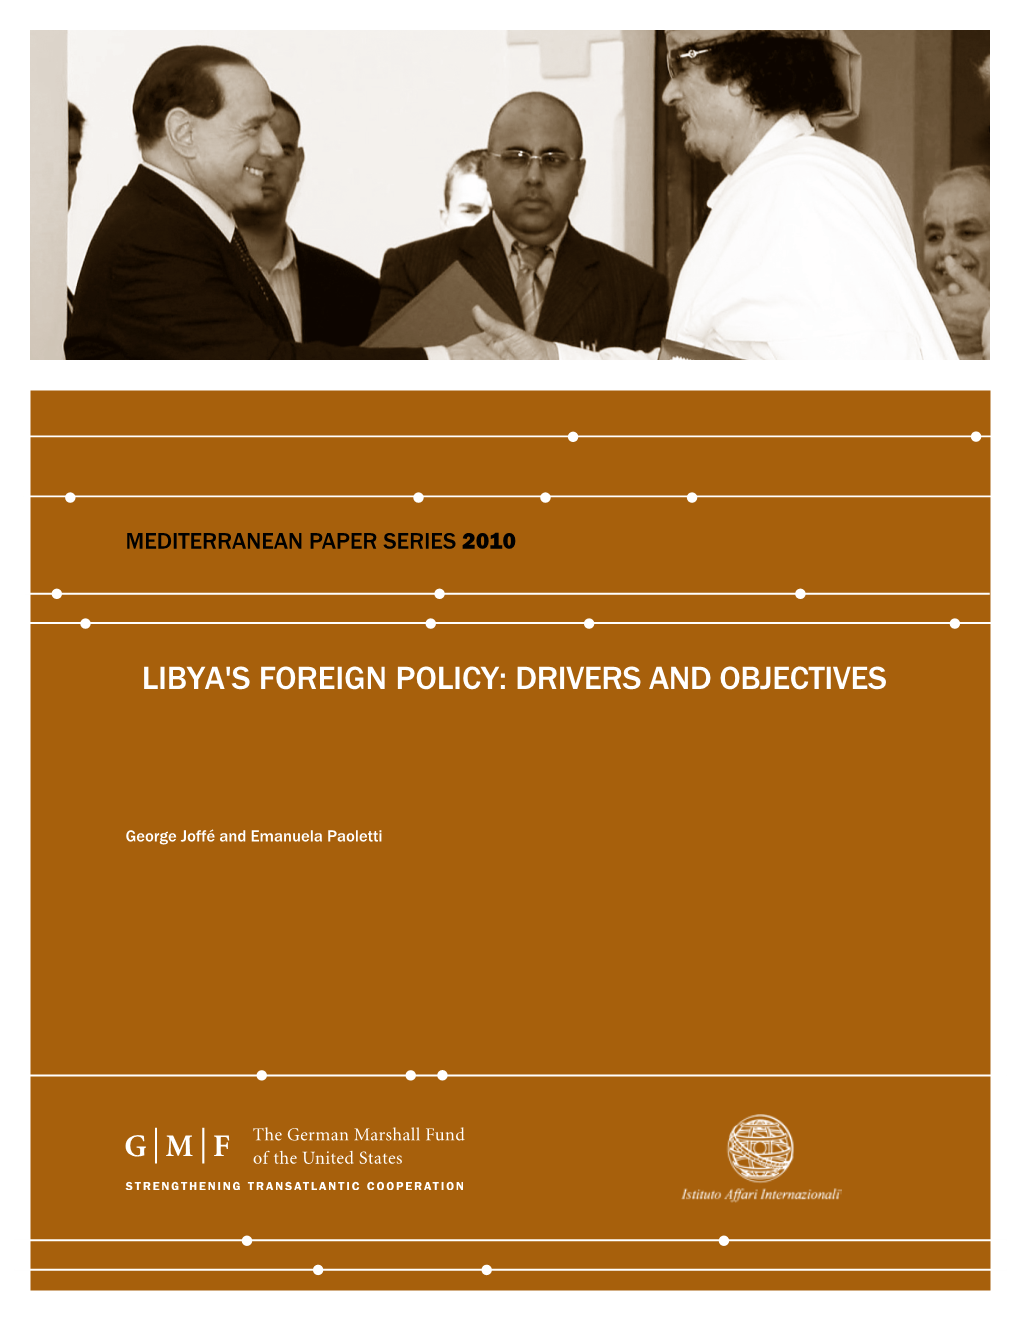 Libya's Foreign Policy: Drivers and Objectives